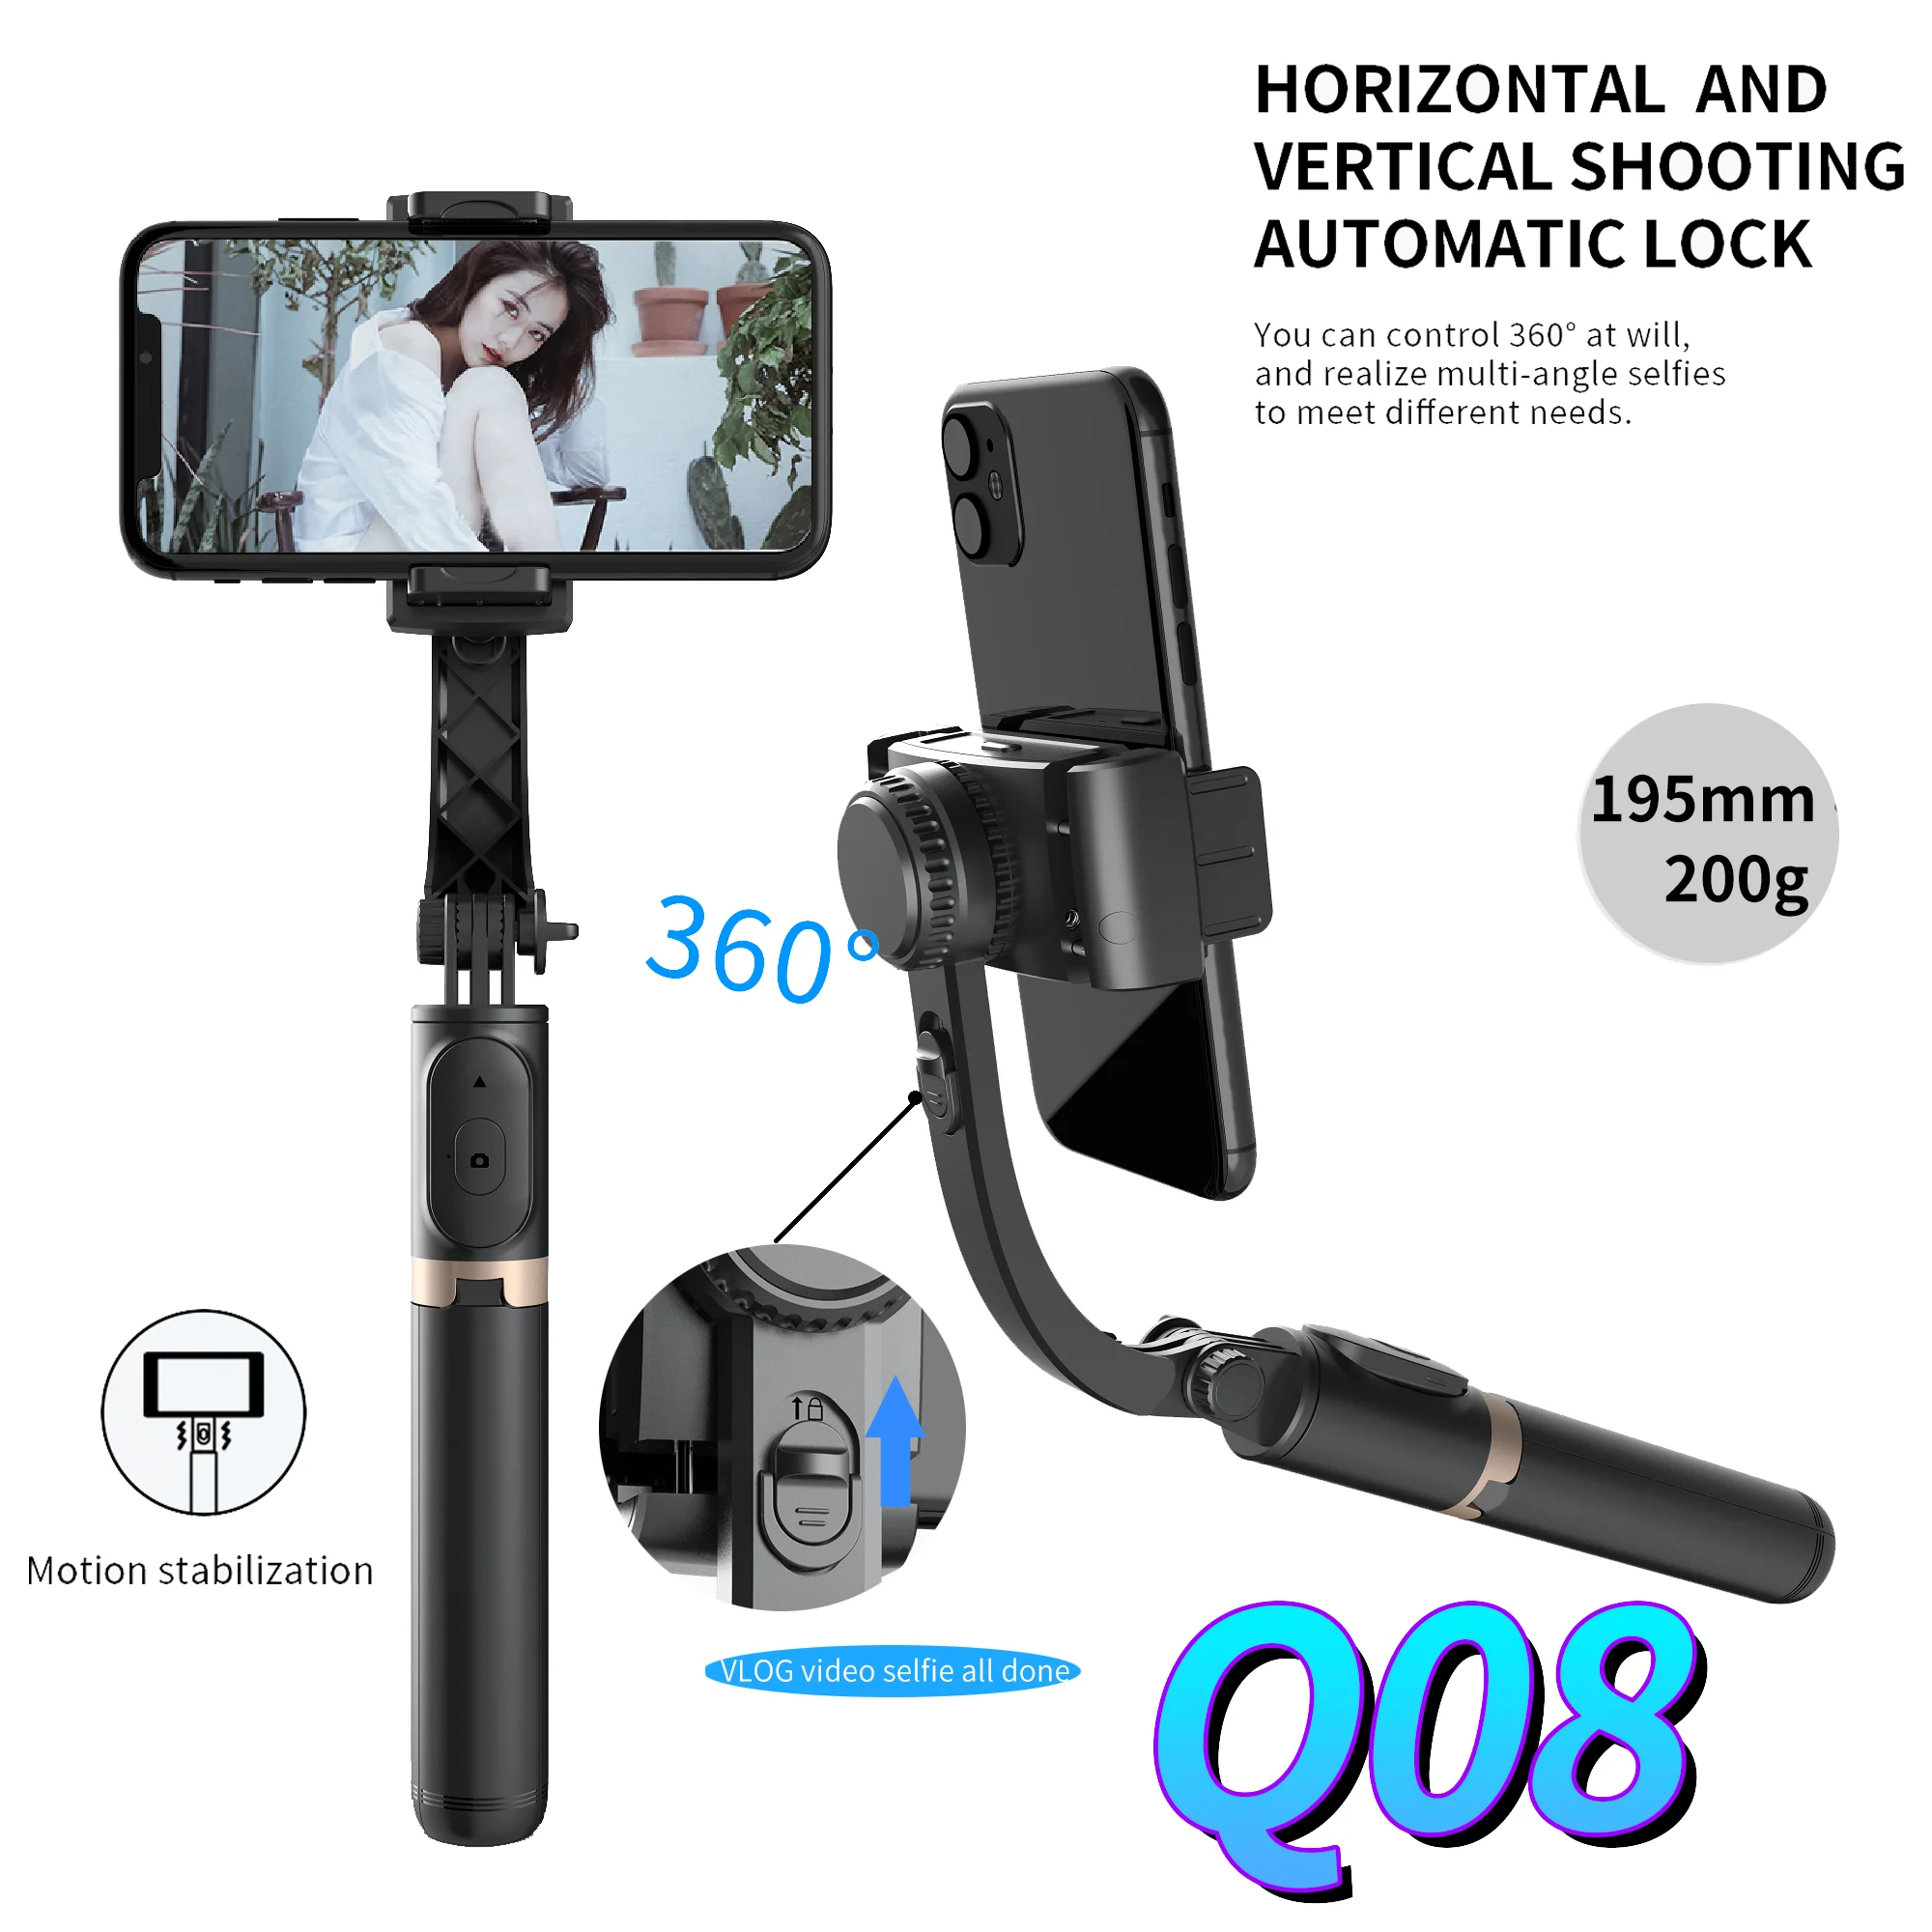 

Q08 Bluetooth Selfie Stick Phone Gimbal Handheld Stabilizer Foldable Extendable Tripod with Remote Control for Xiaomi Iphone